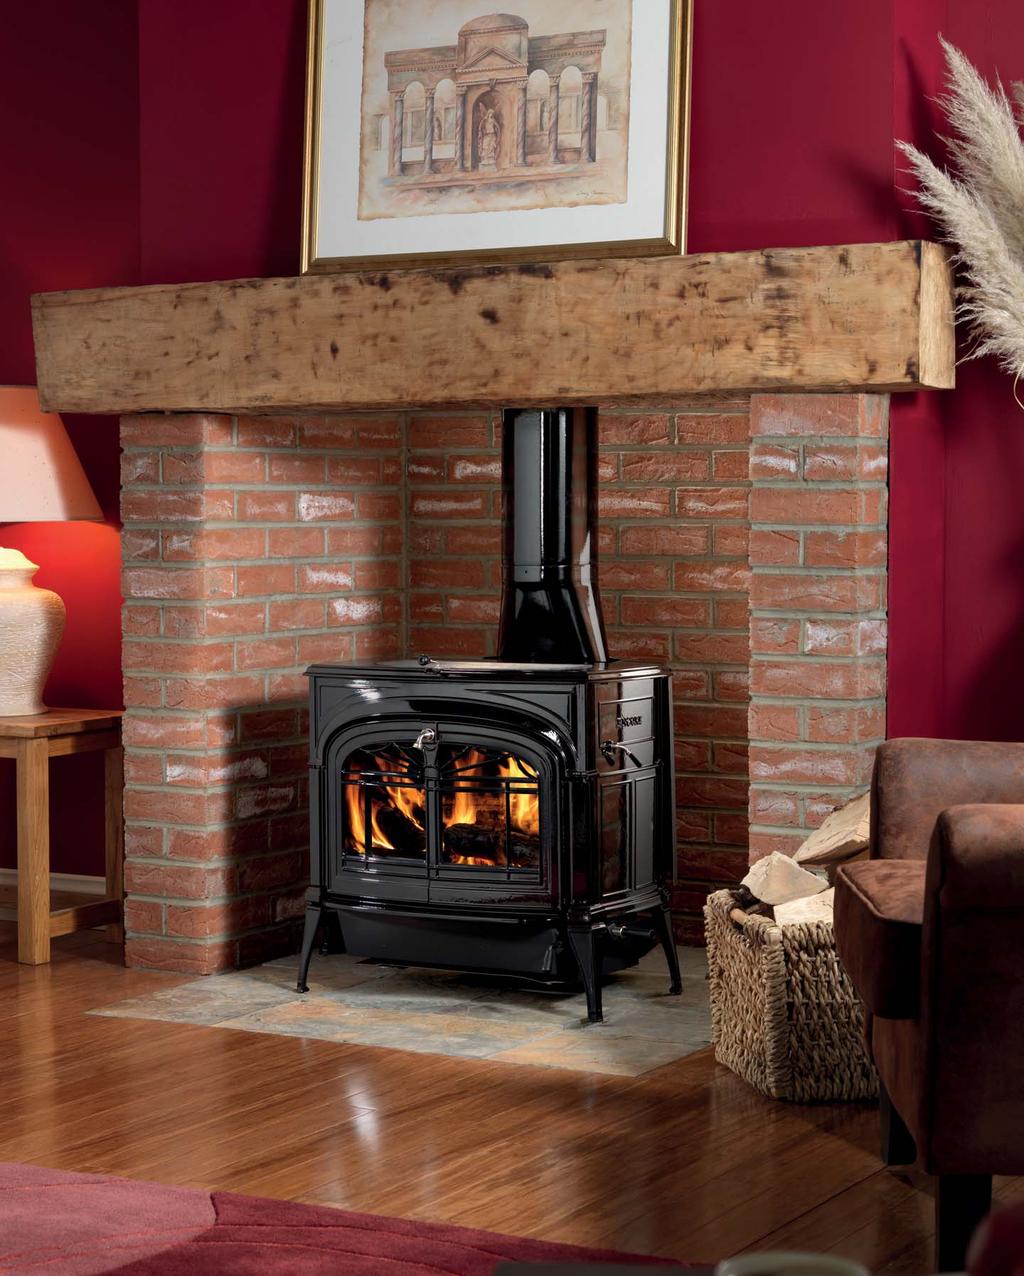 16 www.acrheatproducts.co.uk 17 TC AW TL CC EA ENCORE WOODBURNER Classic Vermont Castings styling, handcrafted cast iron and a 8 Kw output makes the Encore a practical and visually stunning stove.